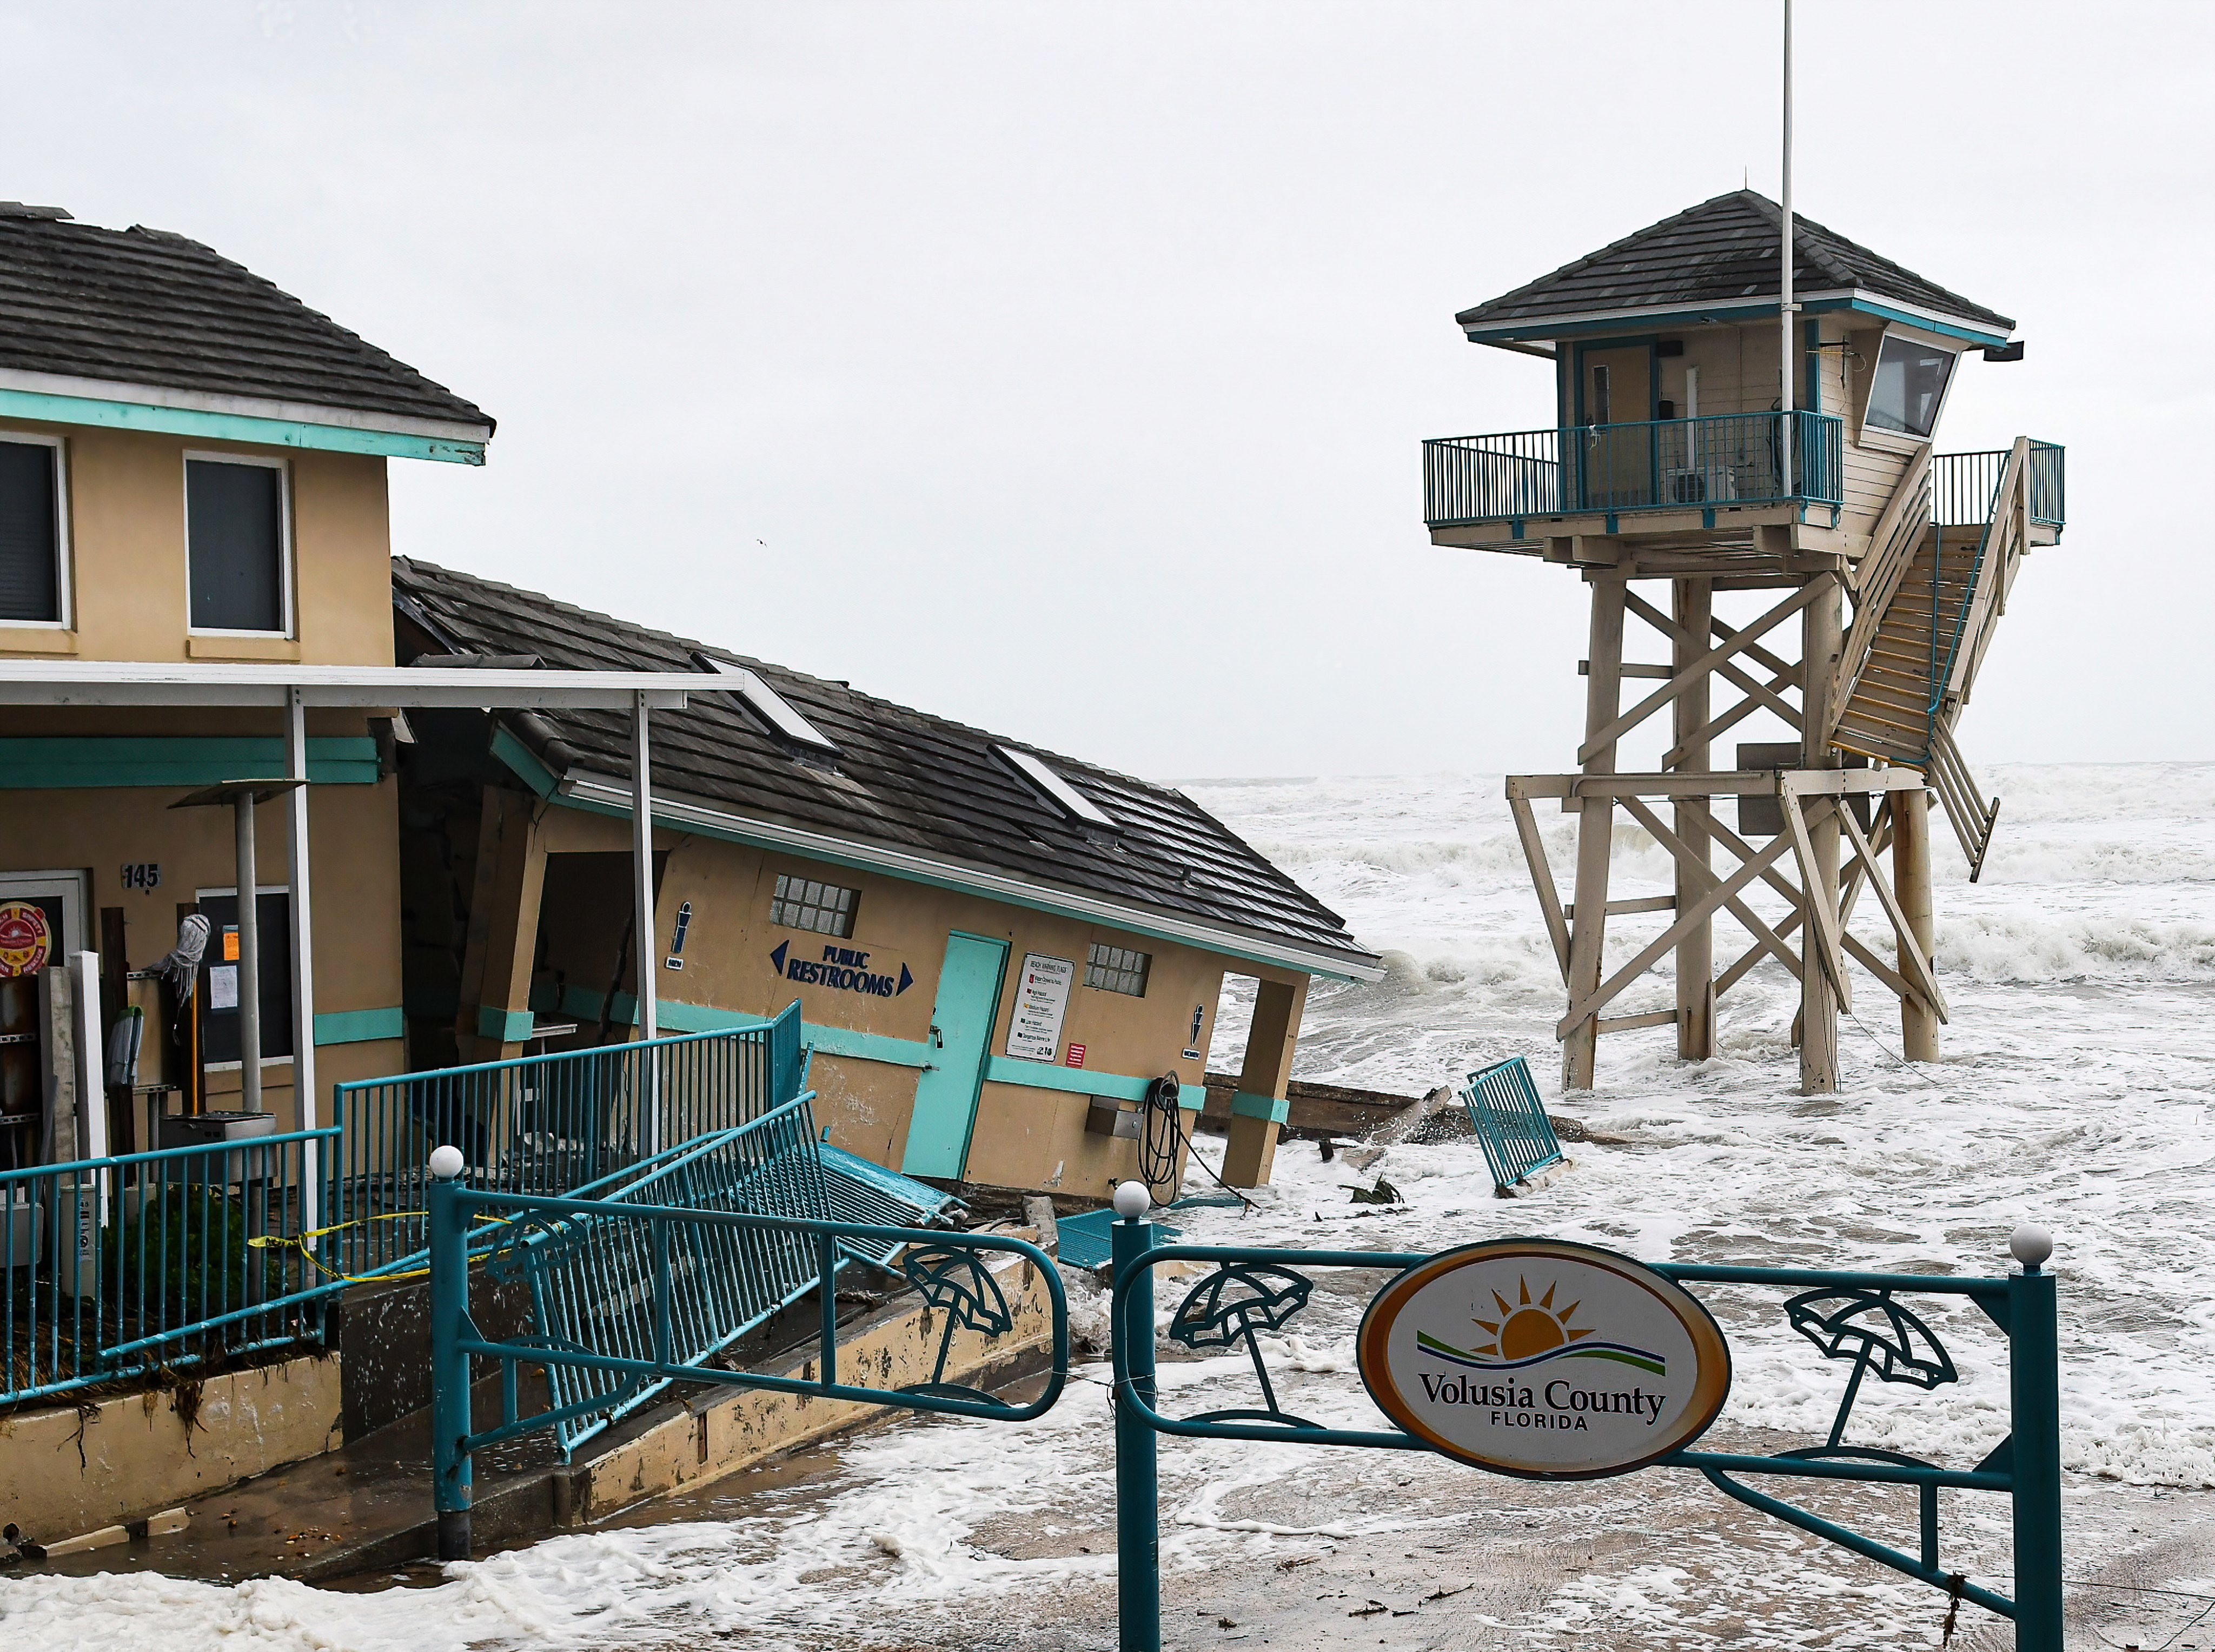 Waves crash near a damaged building and a lifeguard tower in